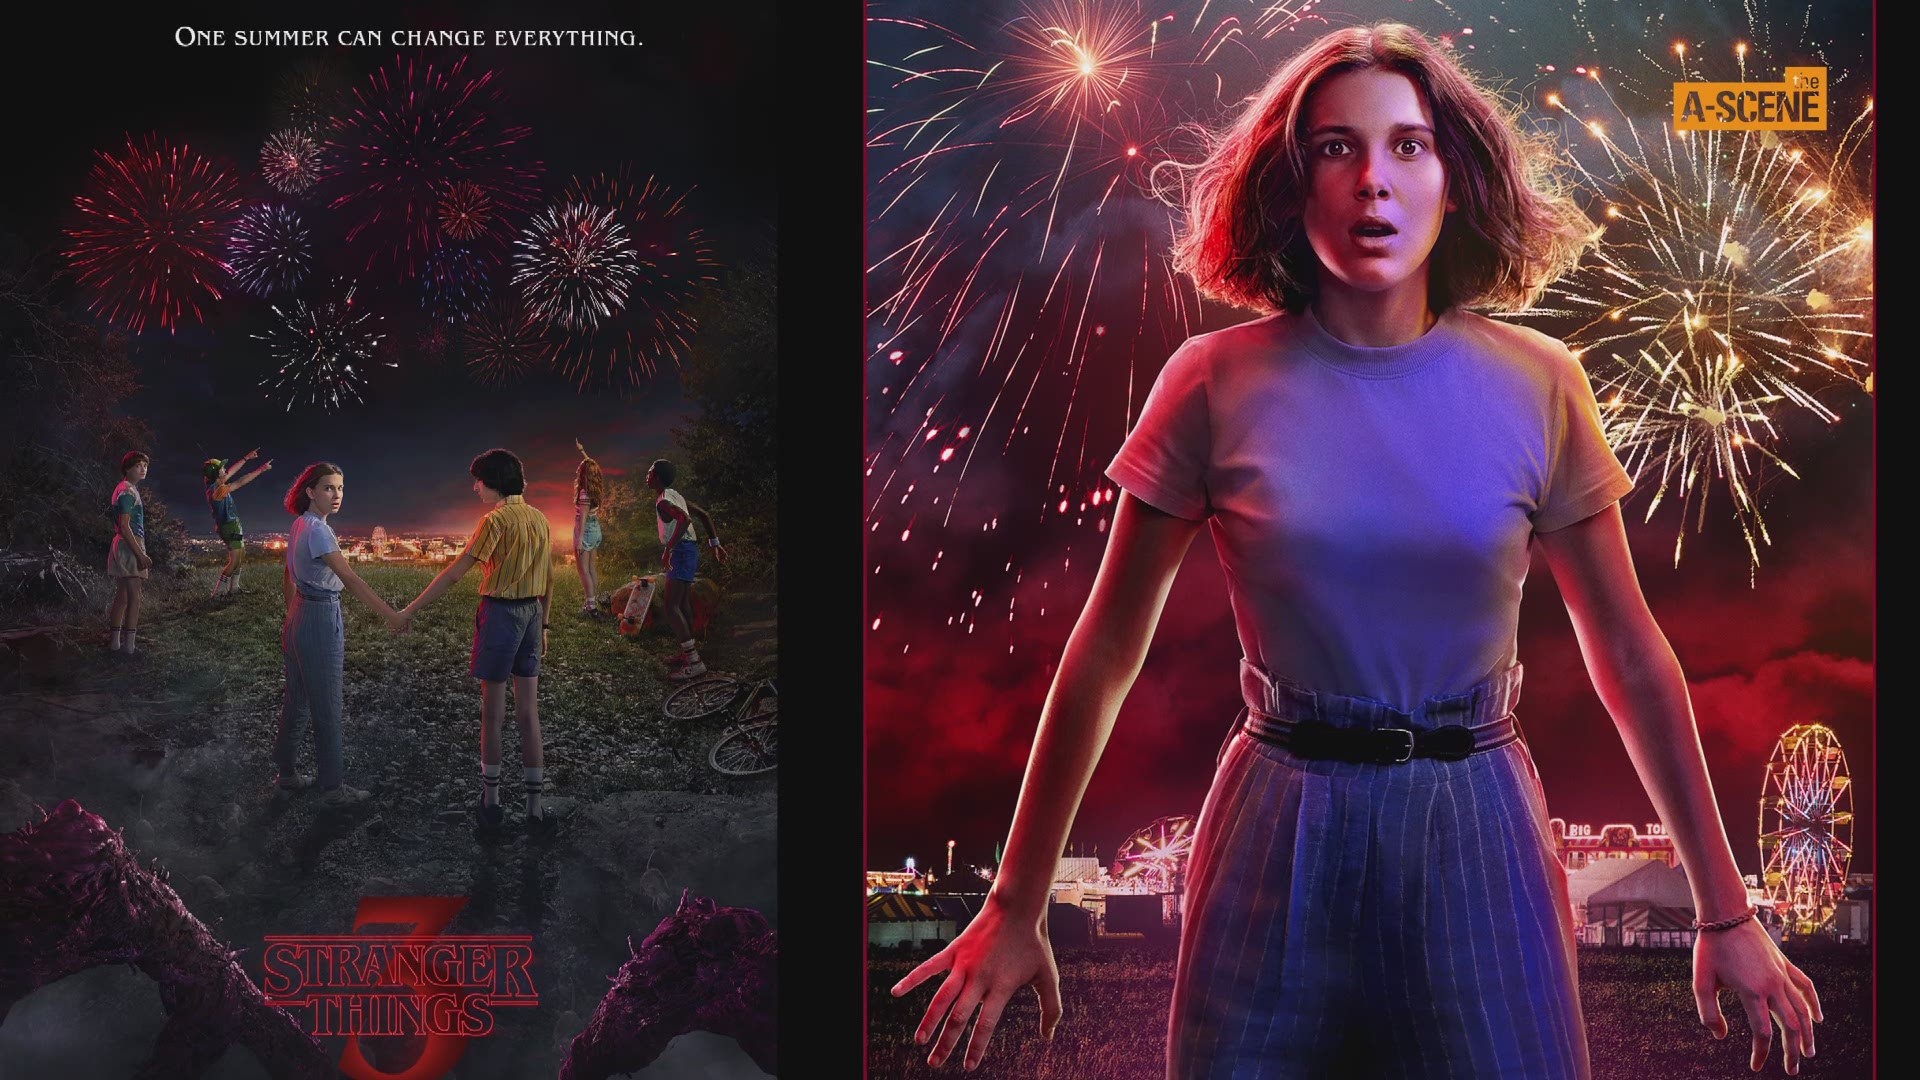 The A-Scene's  Francesca Amiker and producer Ryan J. Dennis detail how the third season of "Stranger Things" was filmed throughout Georgia.